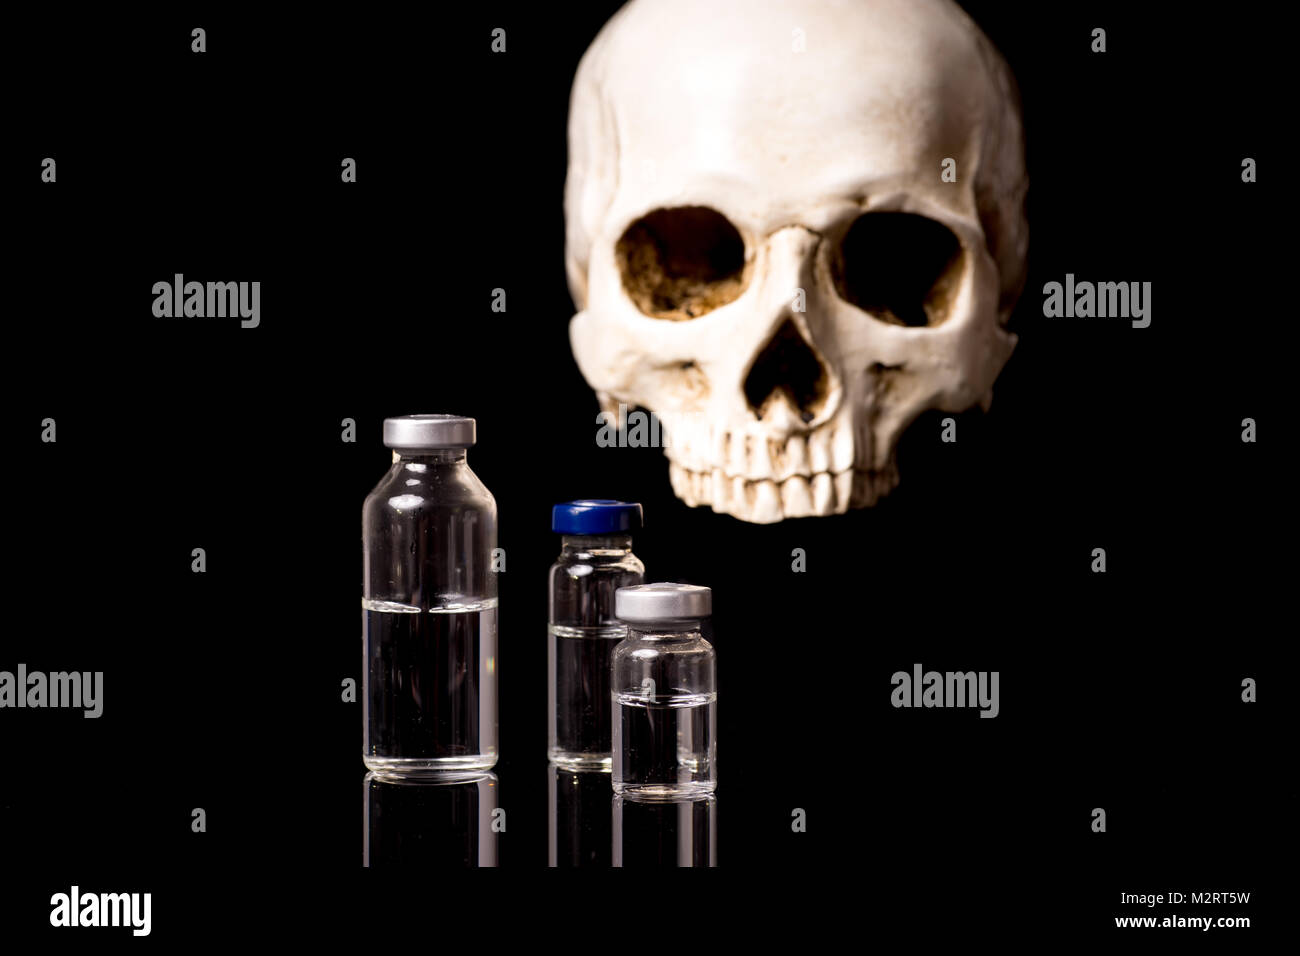 medical vials and blurry skull isolated on black background Stock Photo